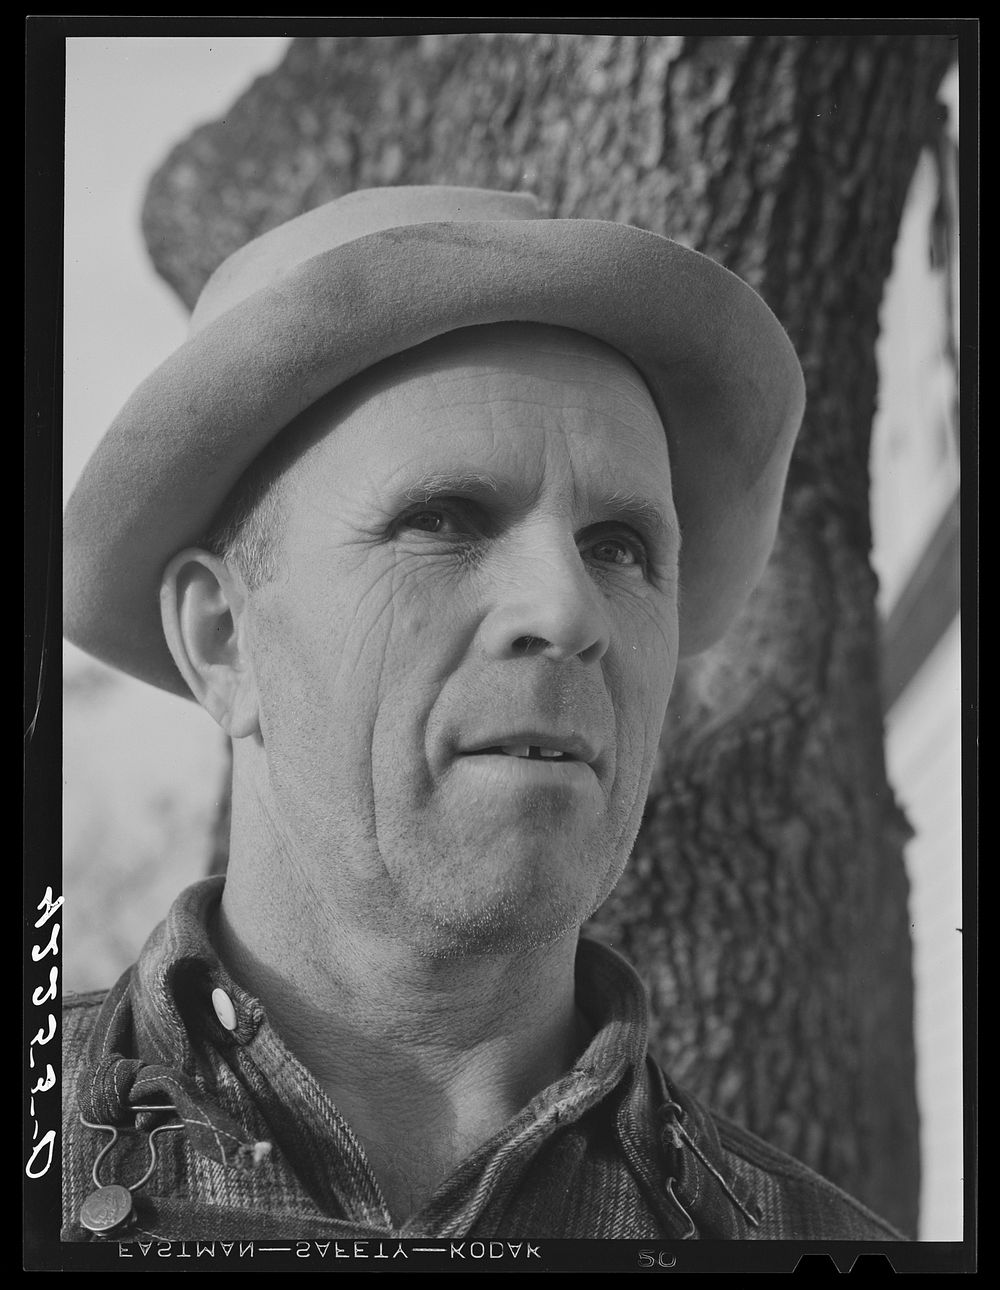 [Untitled photo, possibly related to: Mr. Karrlo Maki, Finnish poultry farmer in Brooklyn, Connecticut]. Sourced from the…